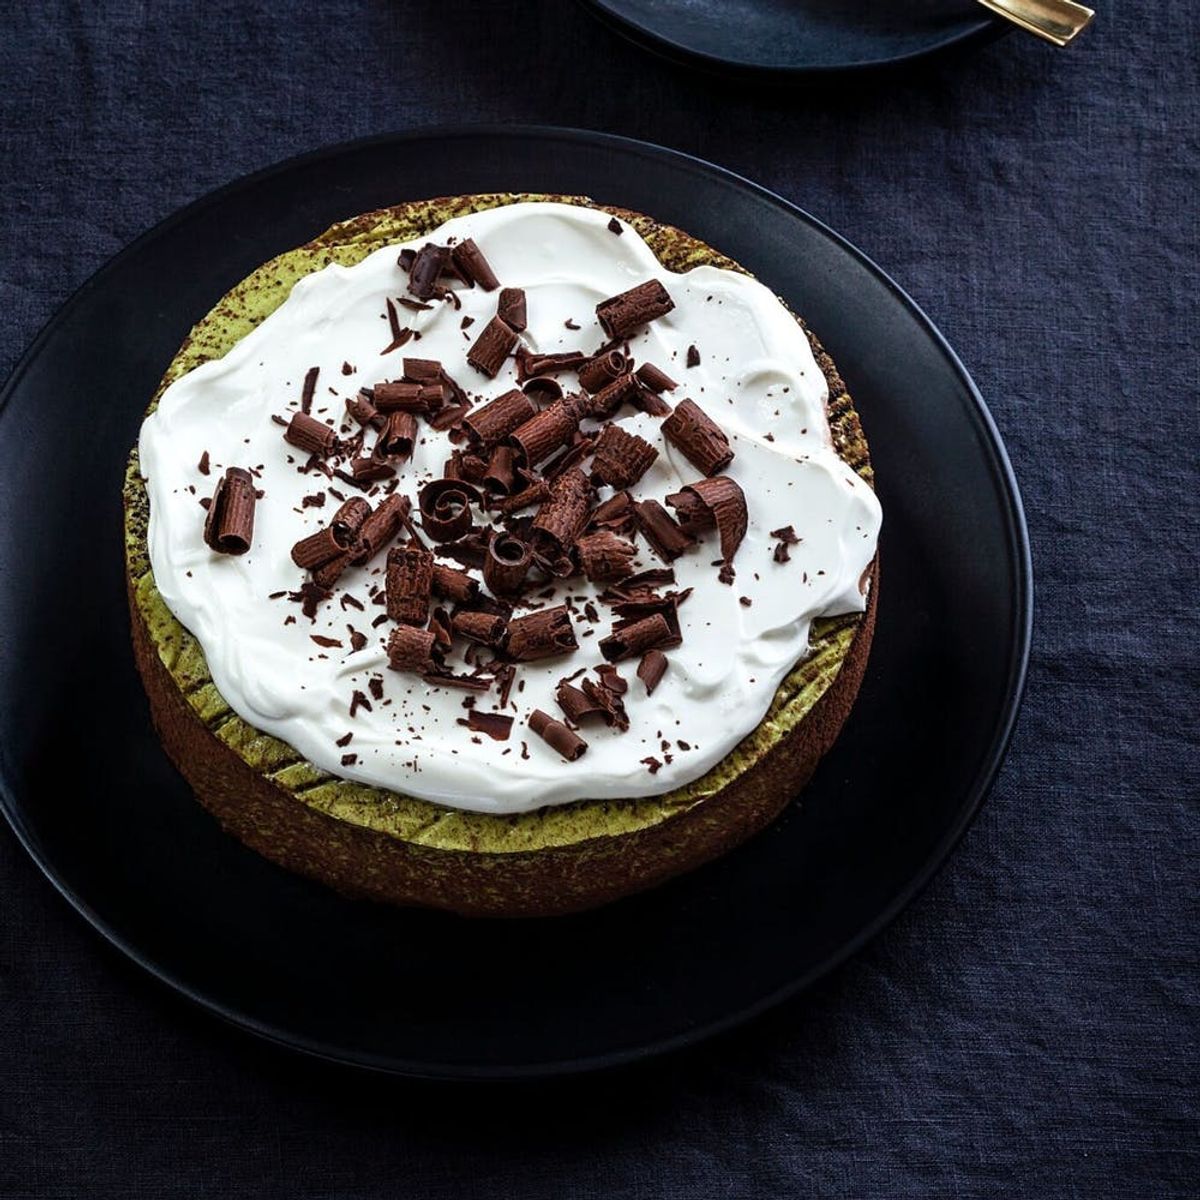 This Keto Matcha Cheesecake Recipe Will Help You Keep Your Low-Carb Resolutions